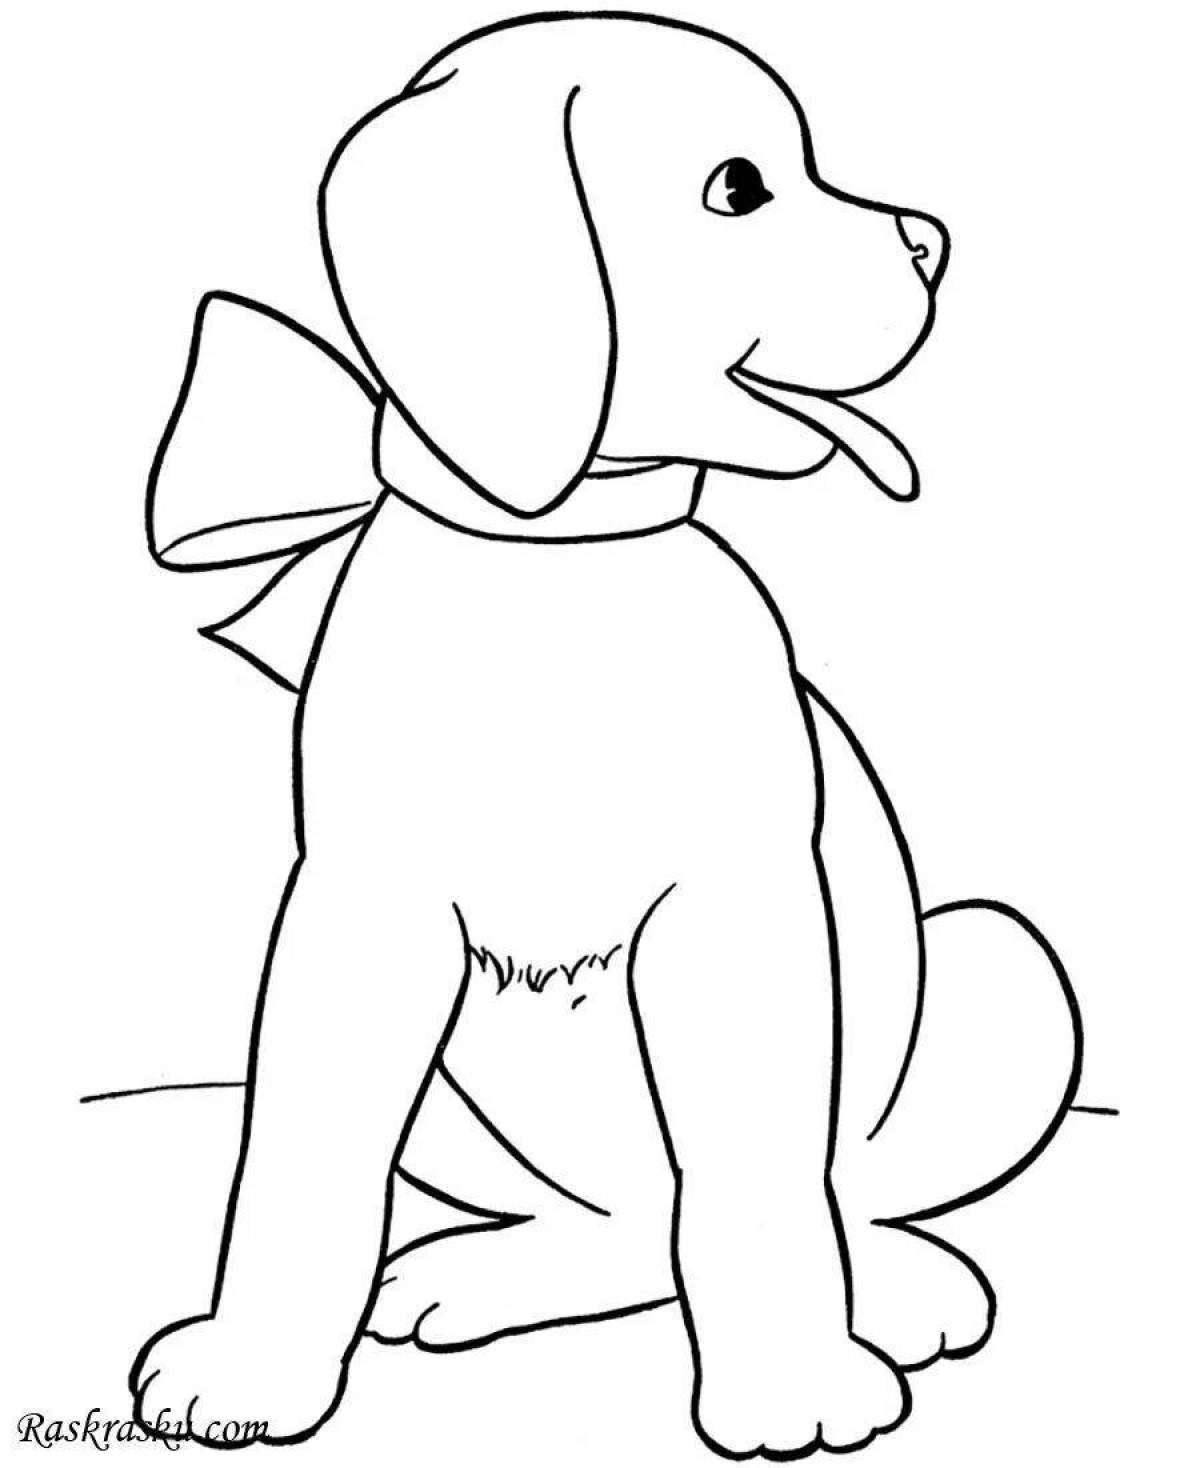 Attractive dog coloring book for children 7-8 years old